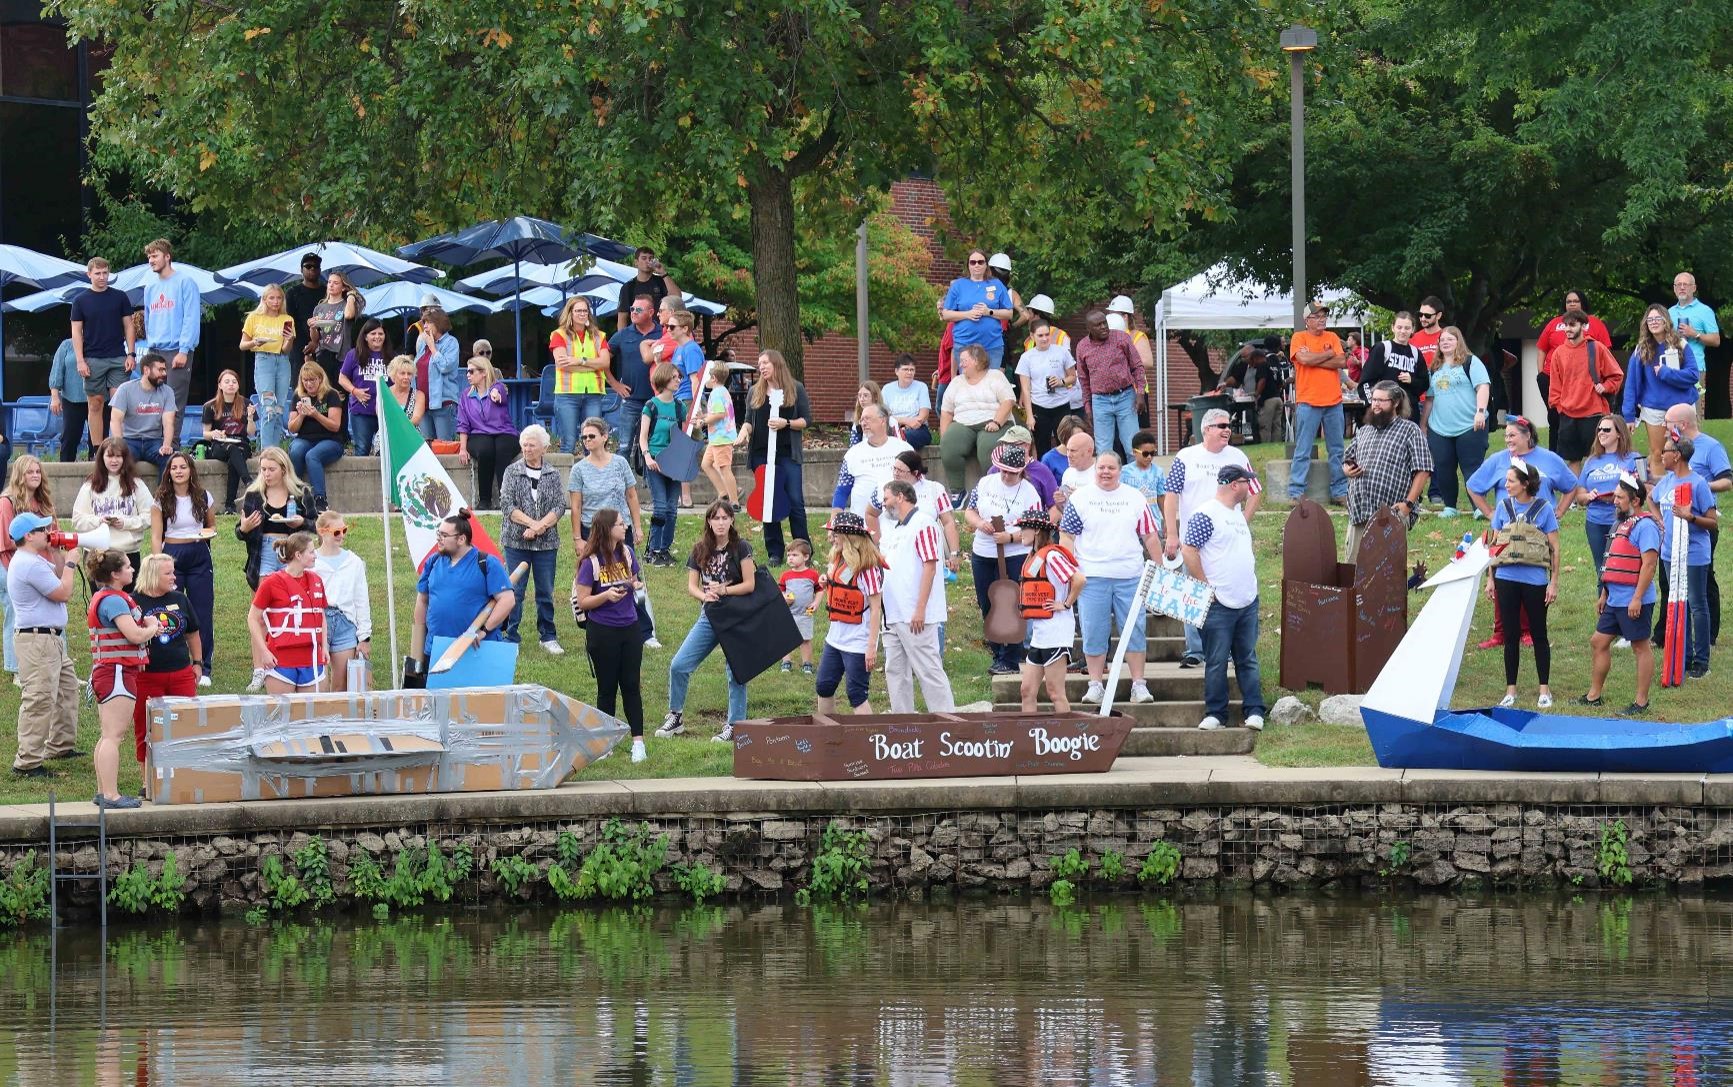 Boats getting ready to launch in regatta with members of the college community looking on.